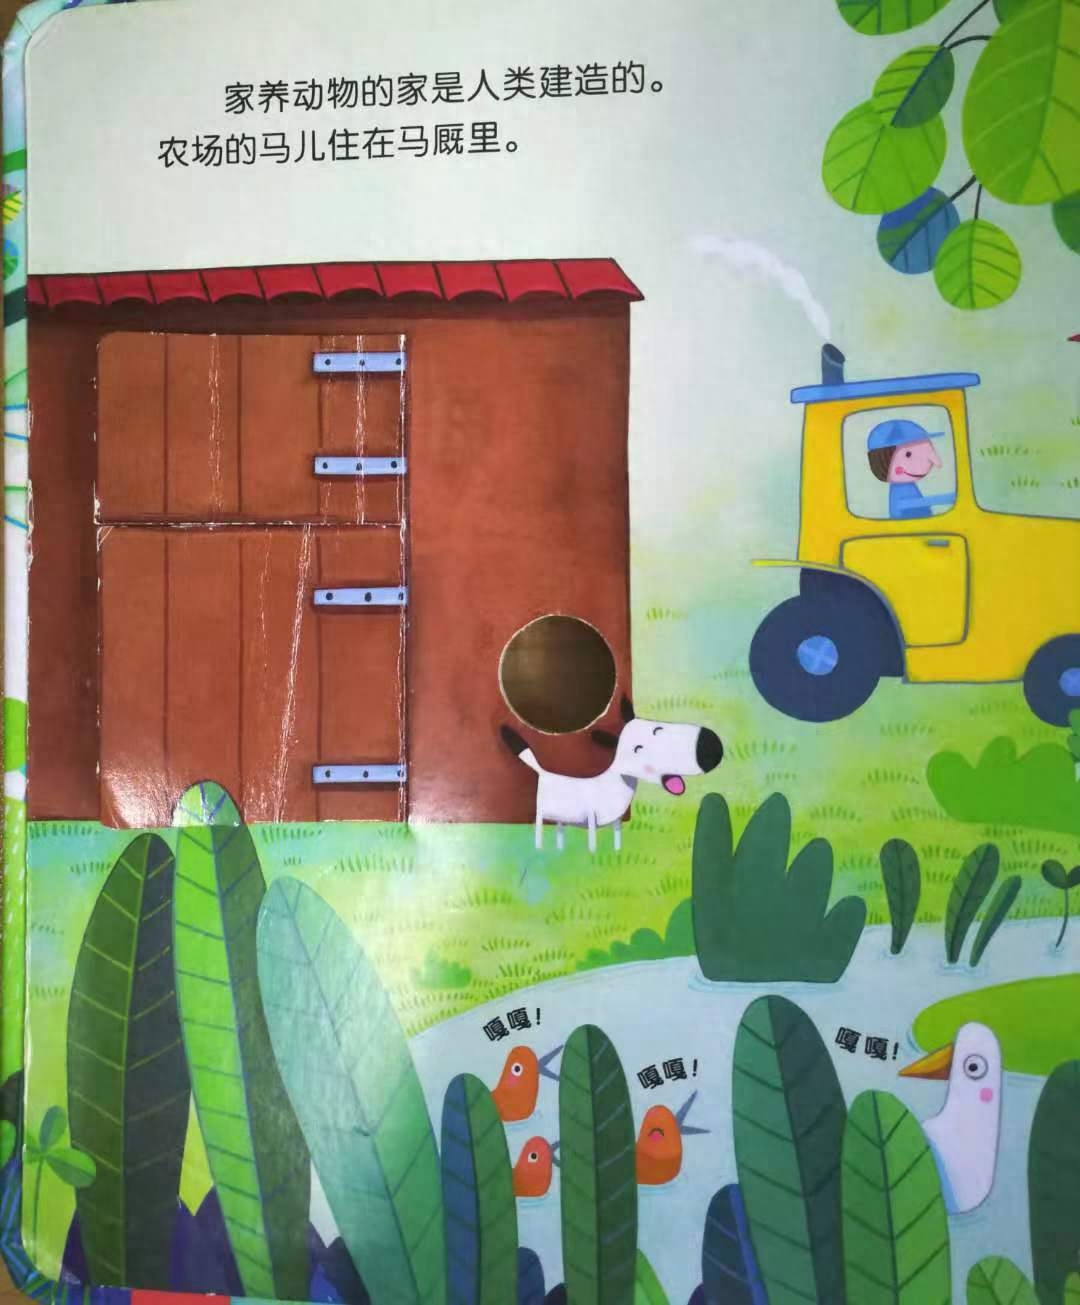 Picture book for young children: "Animals' Home" allows children to understand where animals' homes are